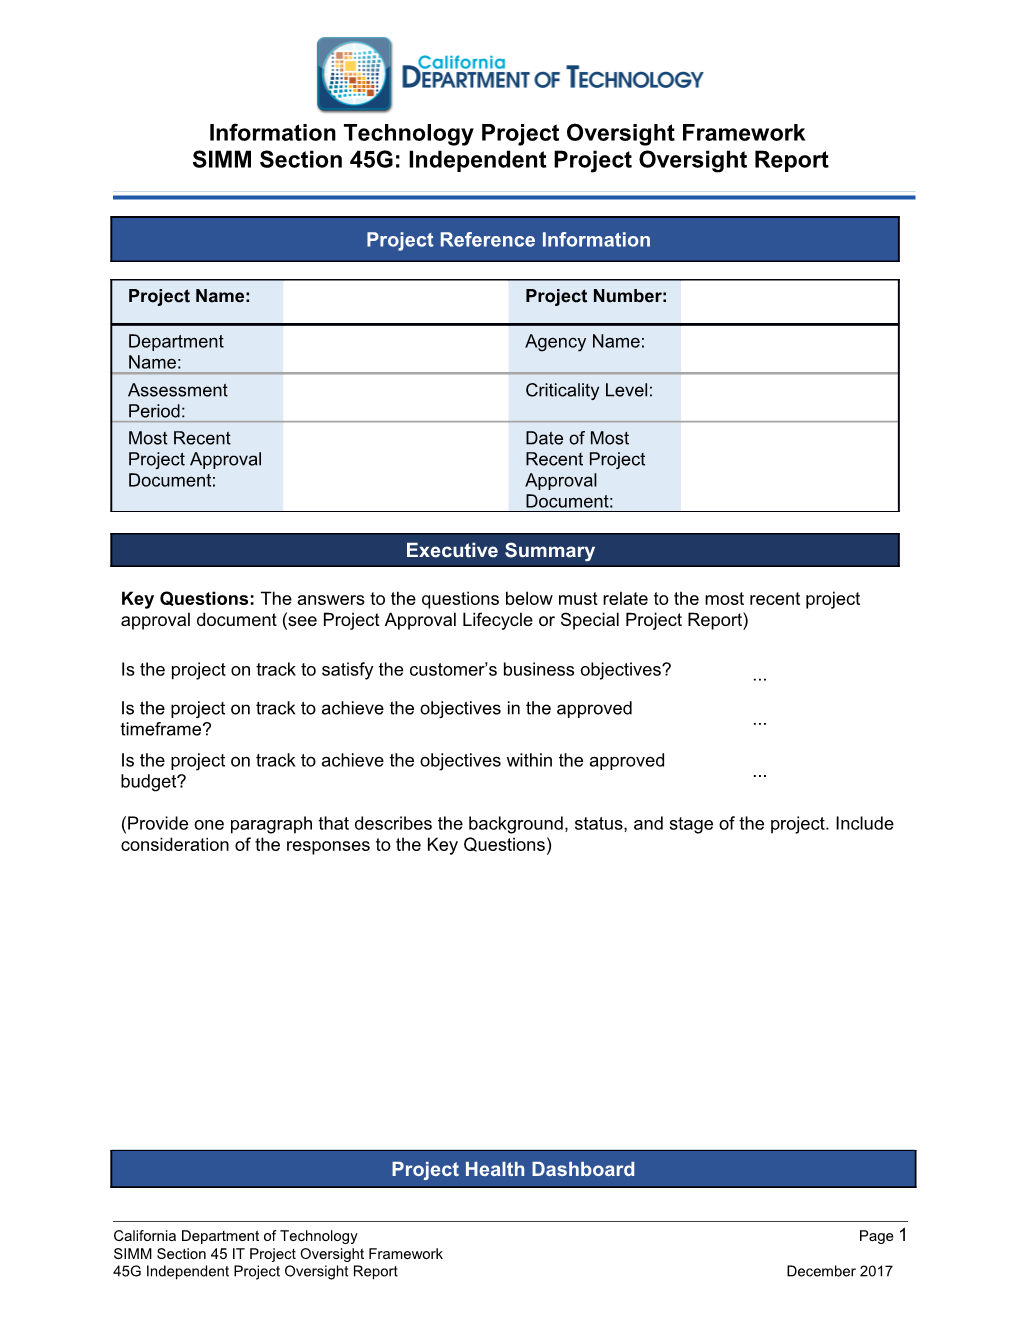 SIMM 45G Independent Project Oversight Report